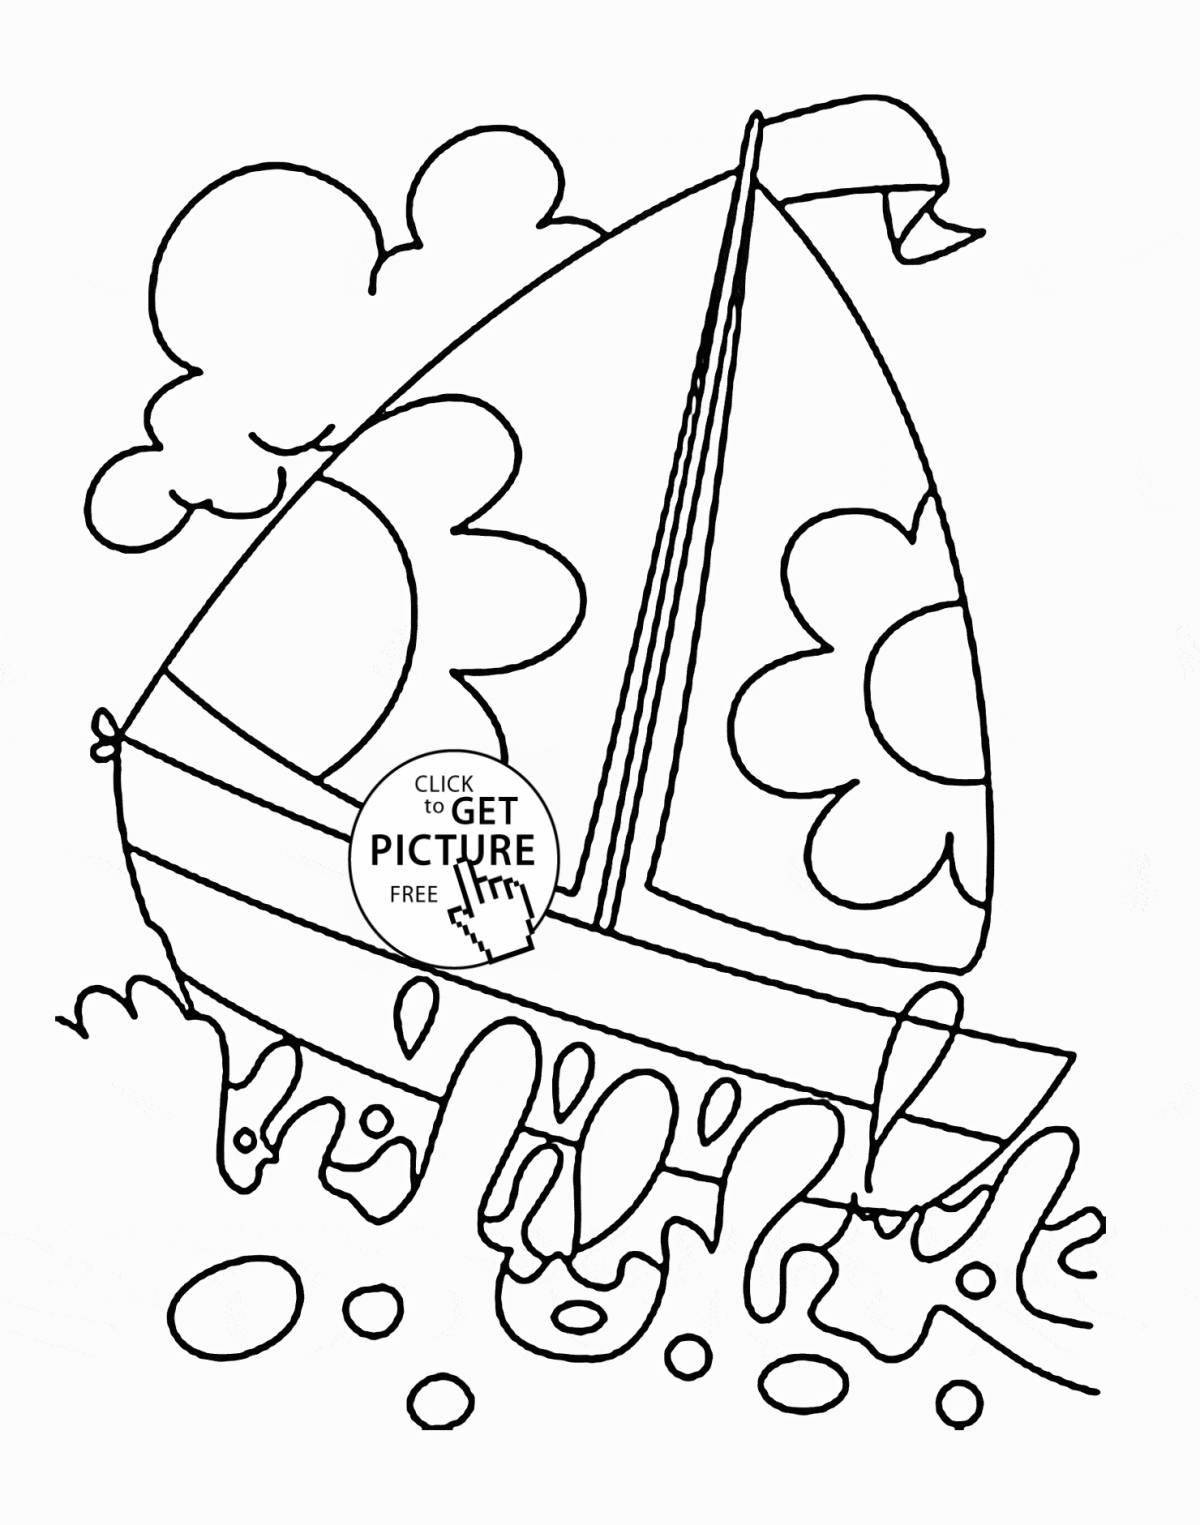 Colorful boat coloring page for kids